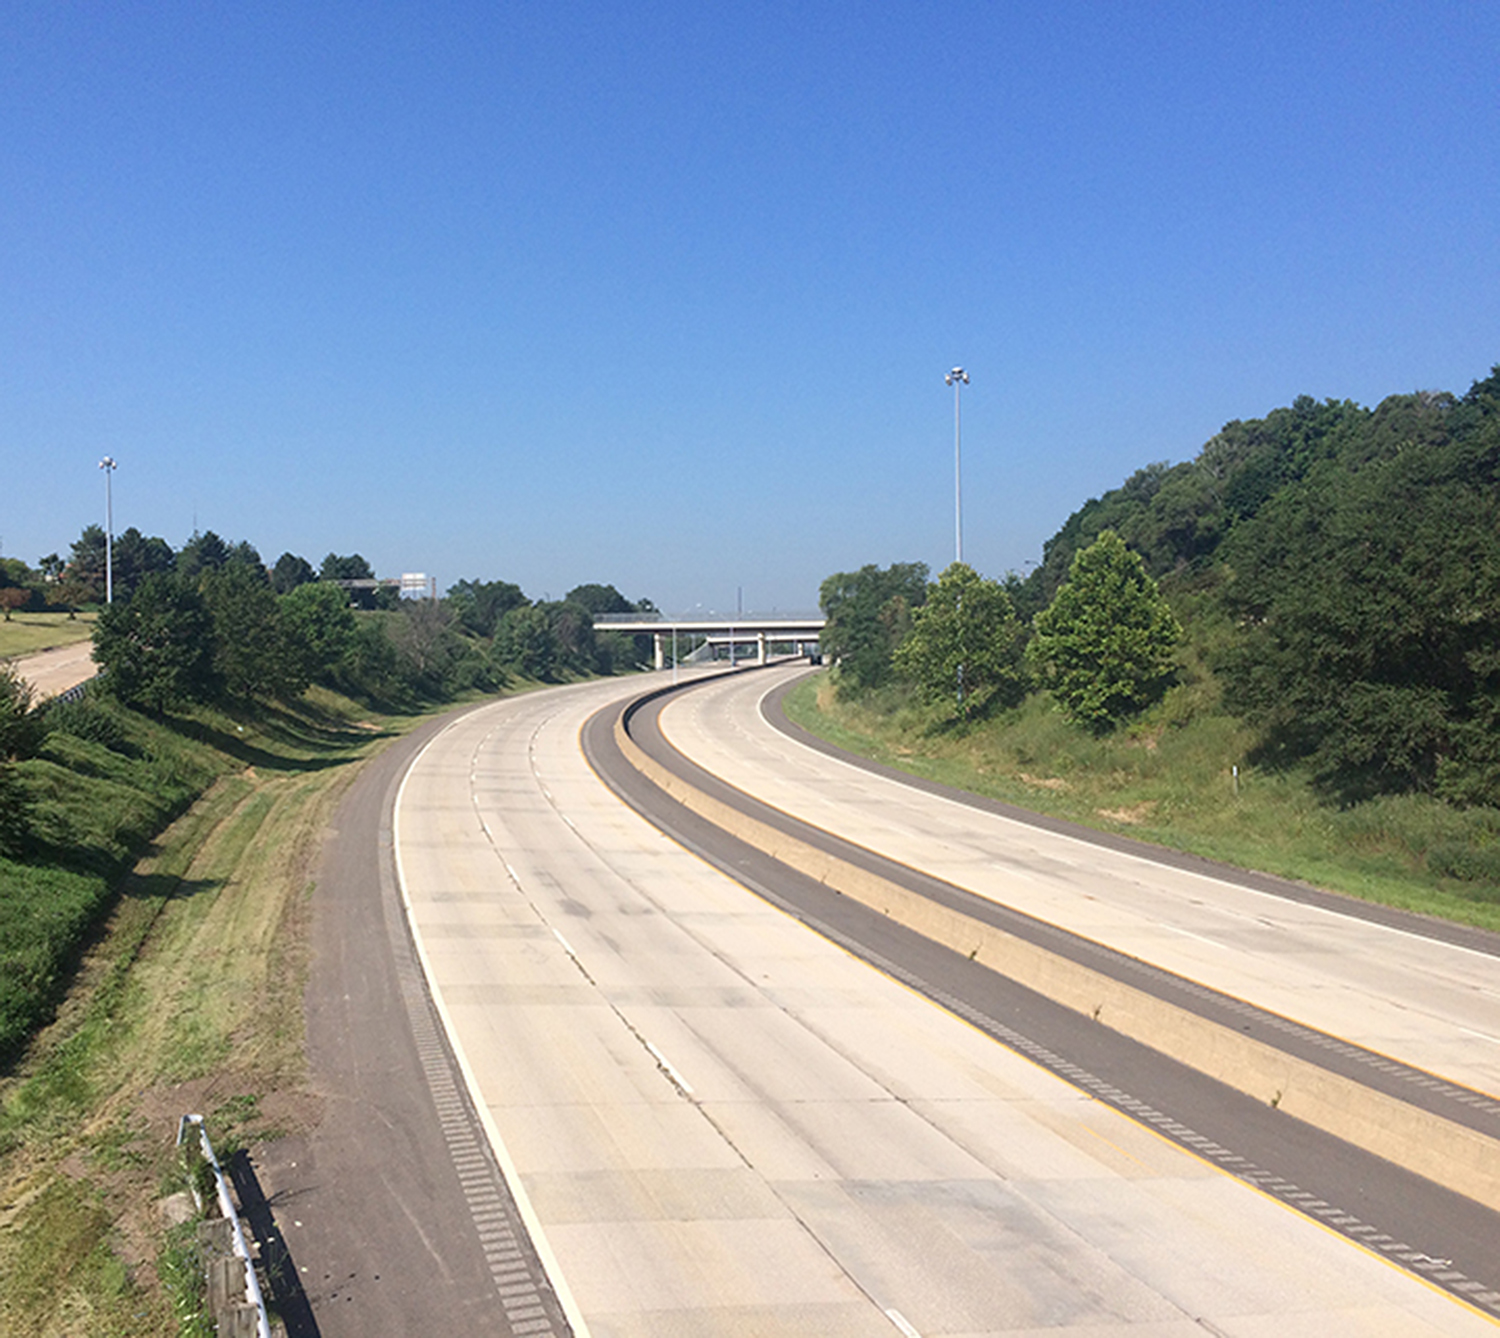 500 Akron, Ohio, residents to share a meal on Innerbelt Freeway